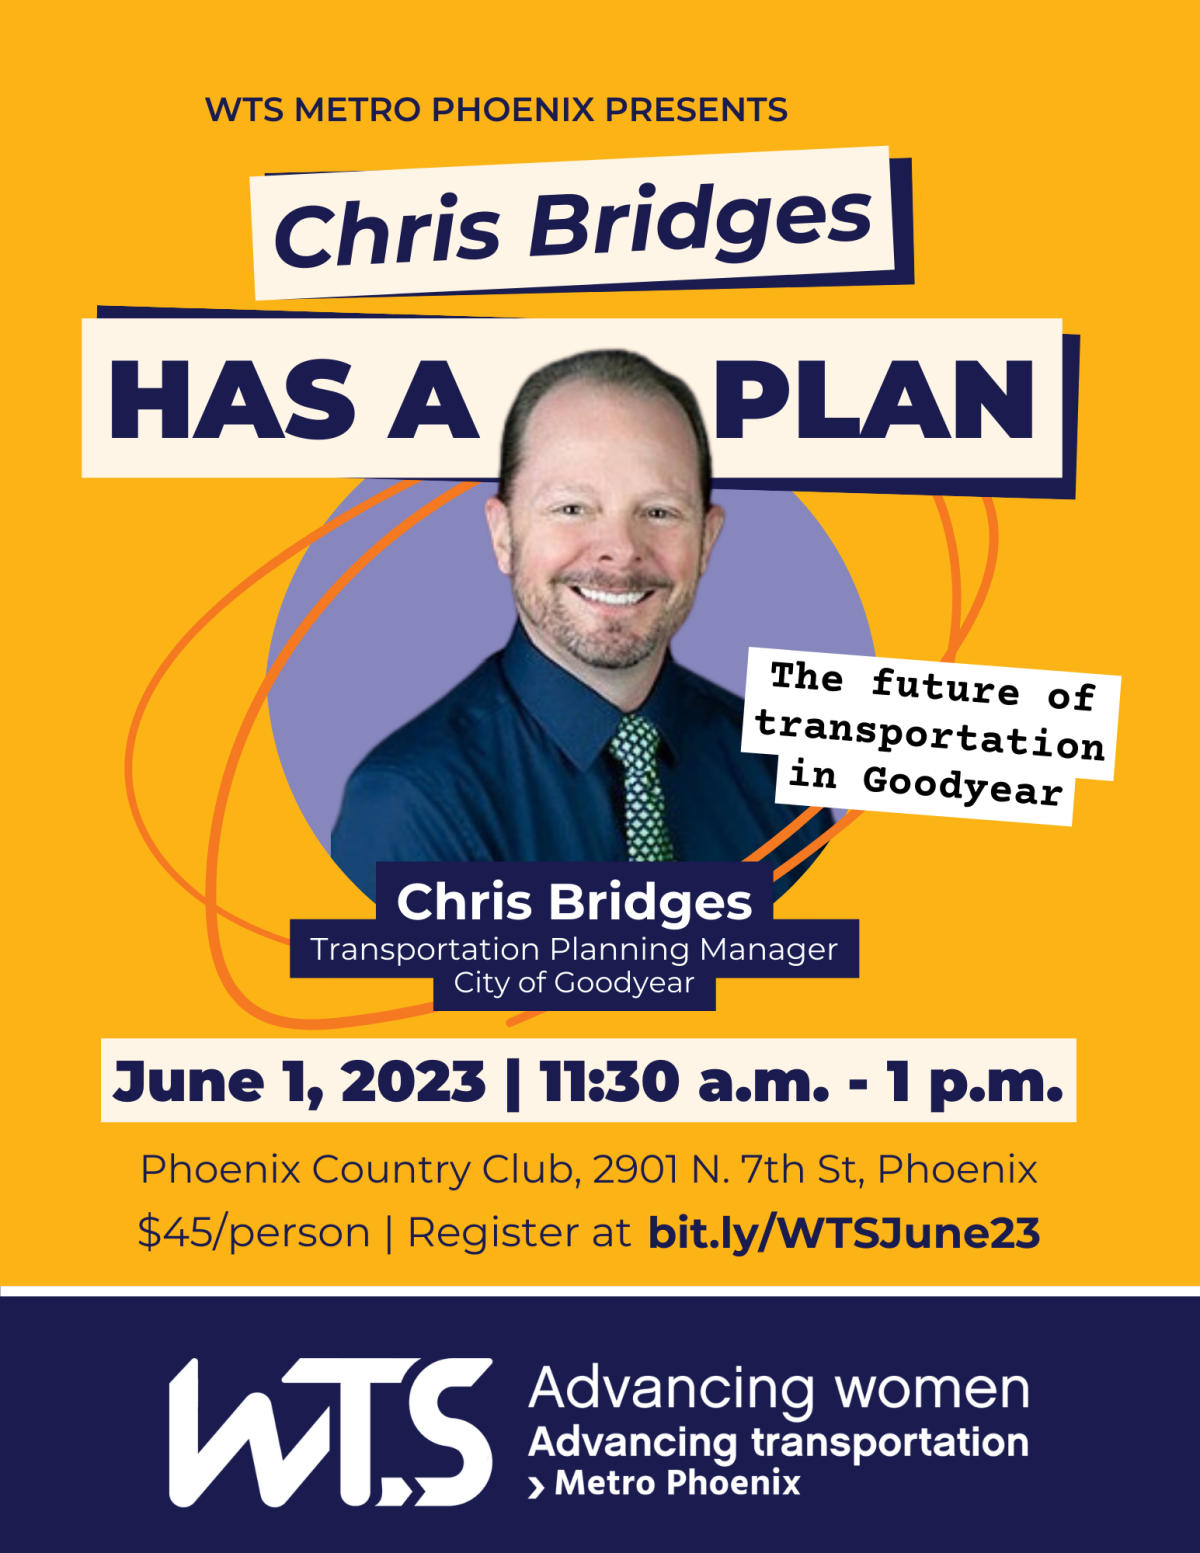 Chris Bridges Has a Plan - June 1 at Phoenix Country Club at 11:30 to discuss the future of transportation in Goodyear